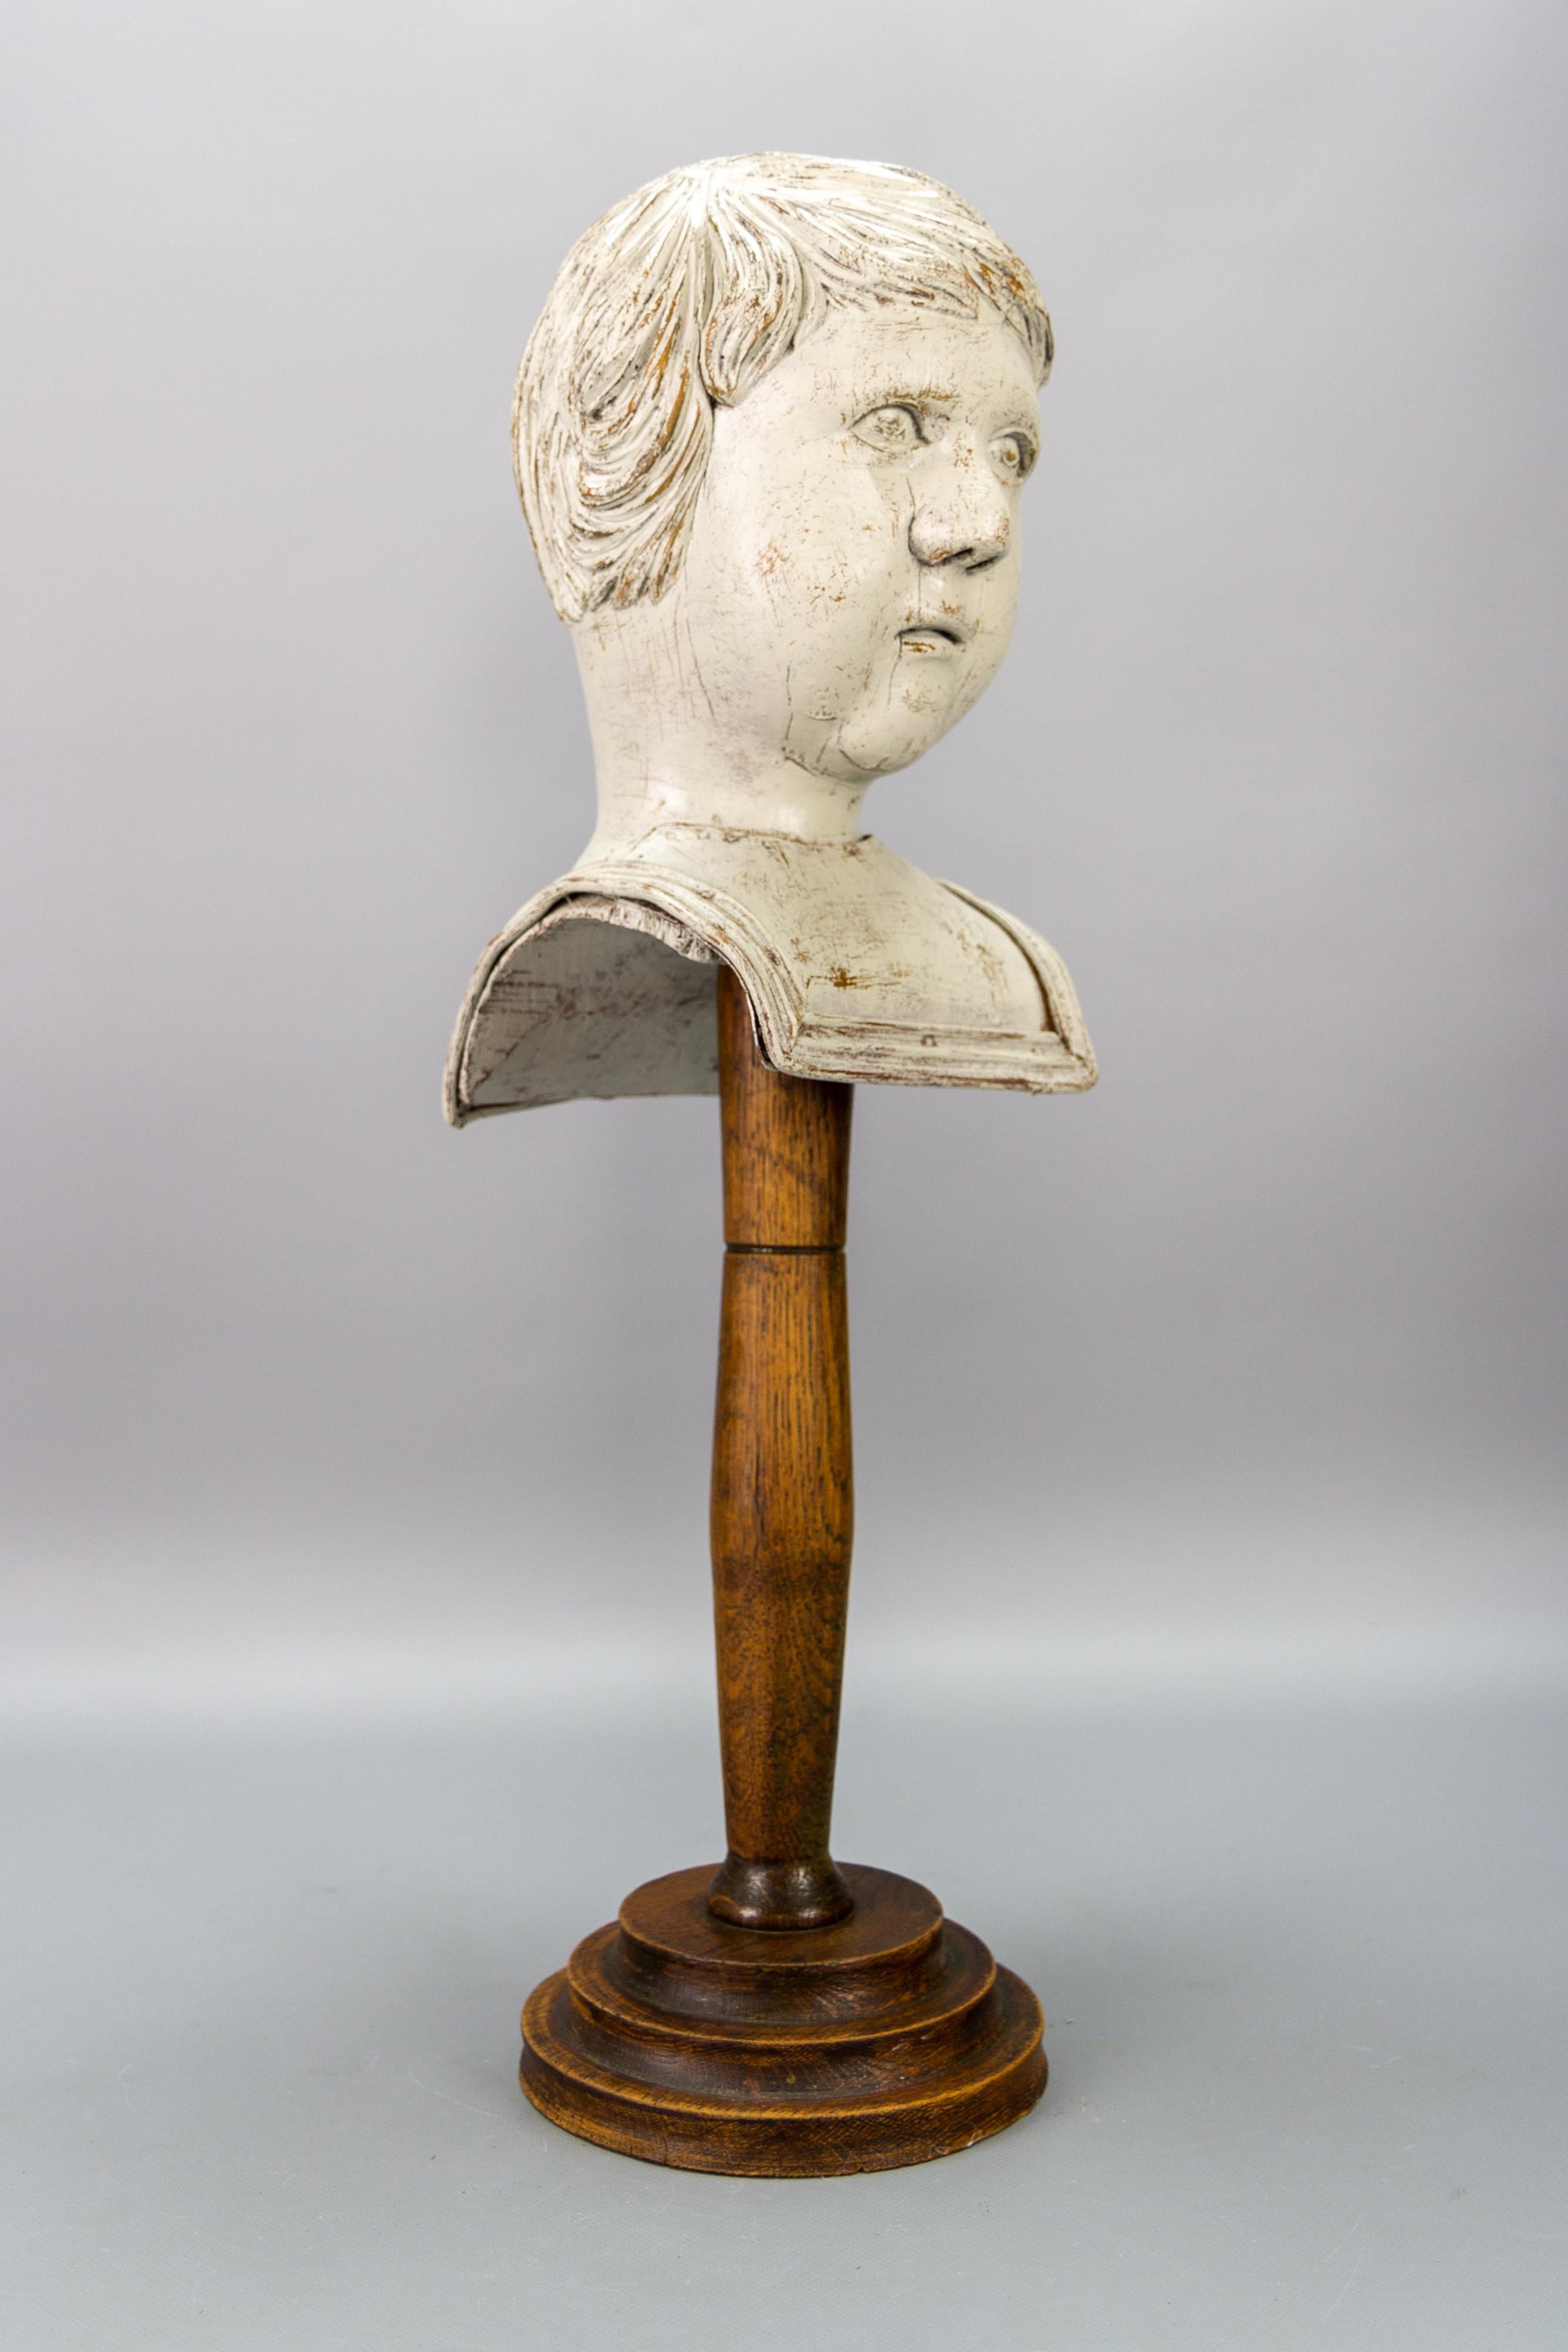 Early 20th Century French Whitewashed Carved Wooden Sculpture Head or Bust on a Pedestal For Sale